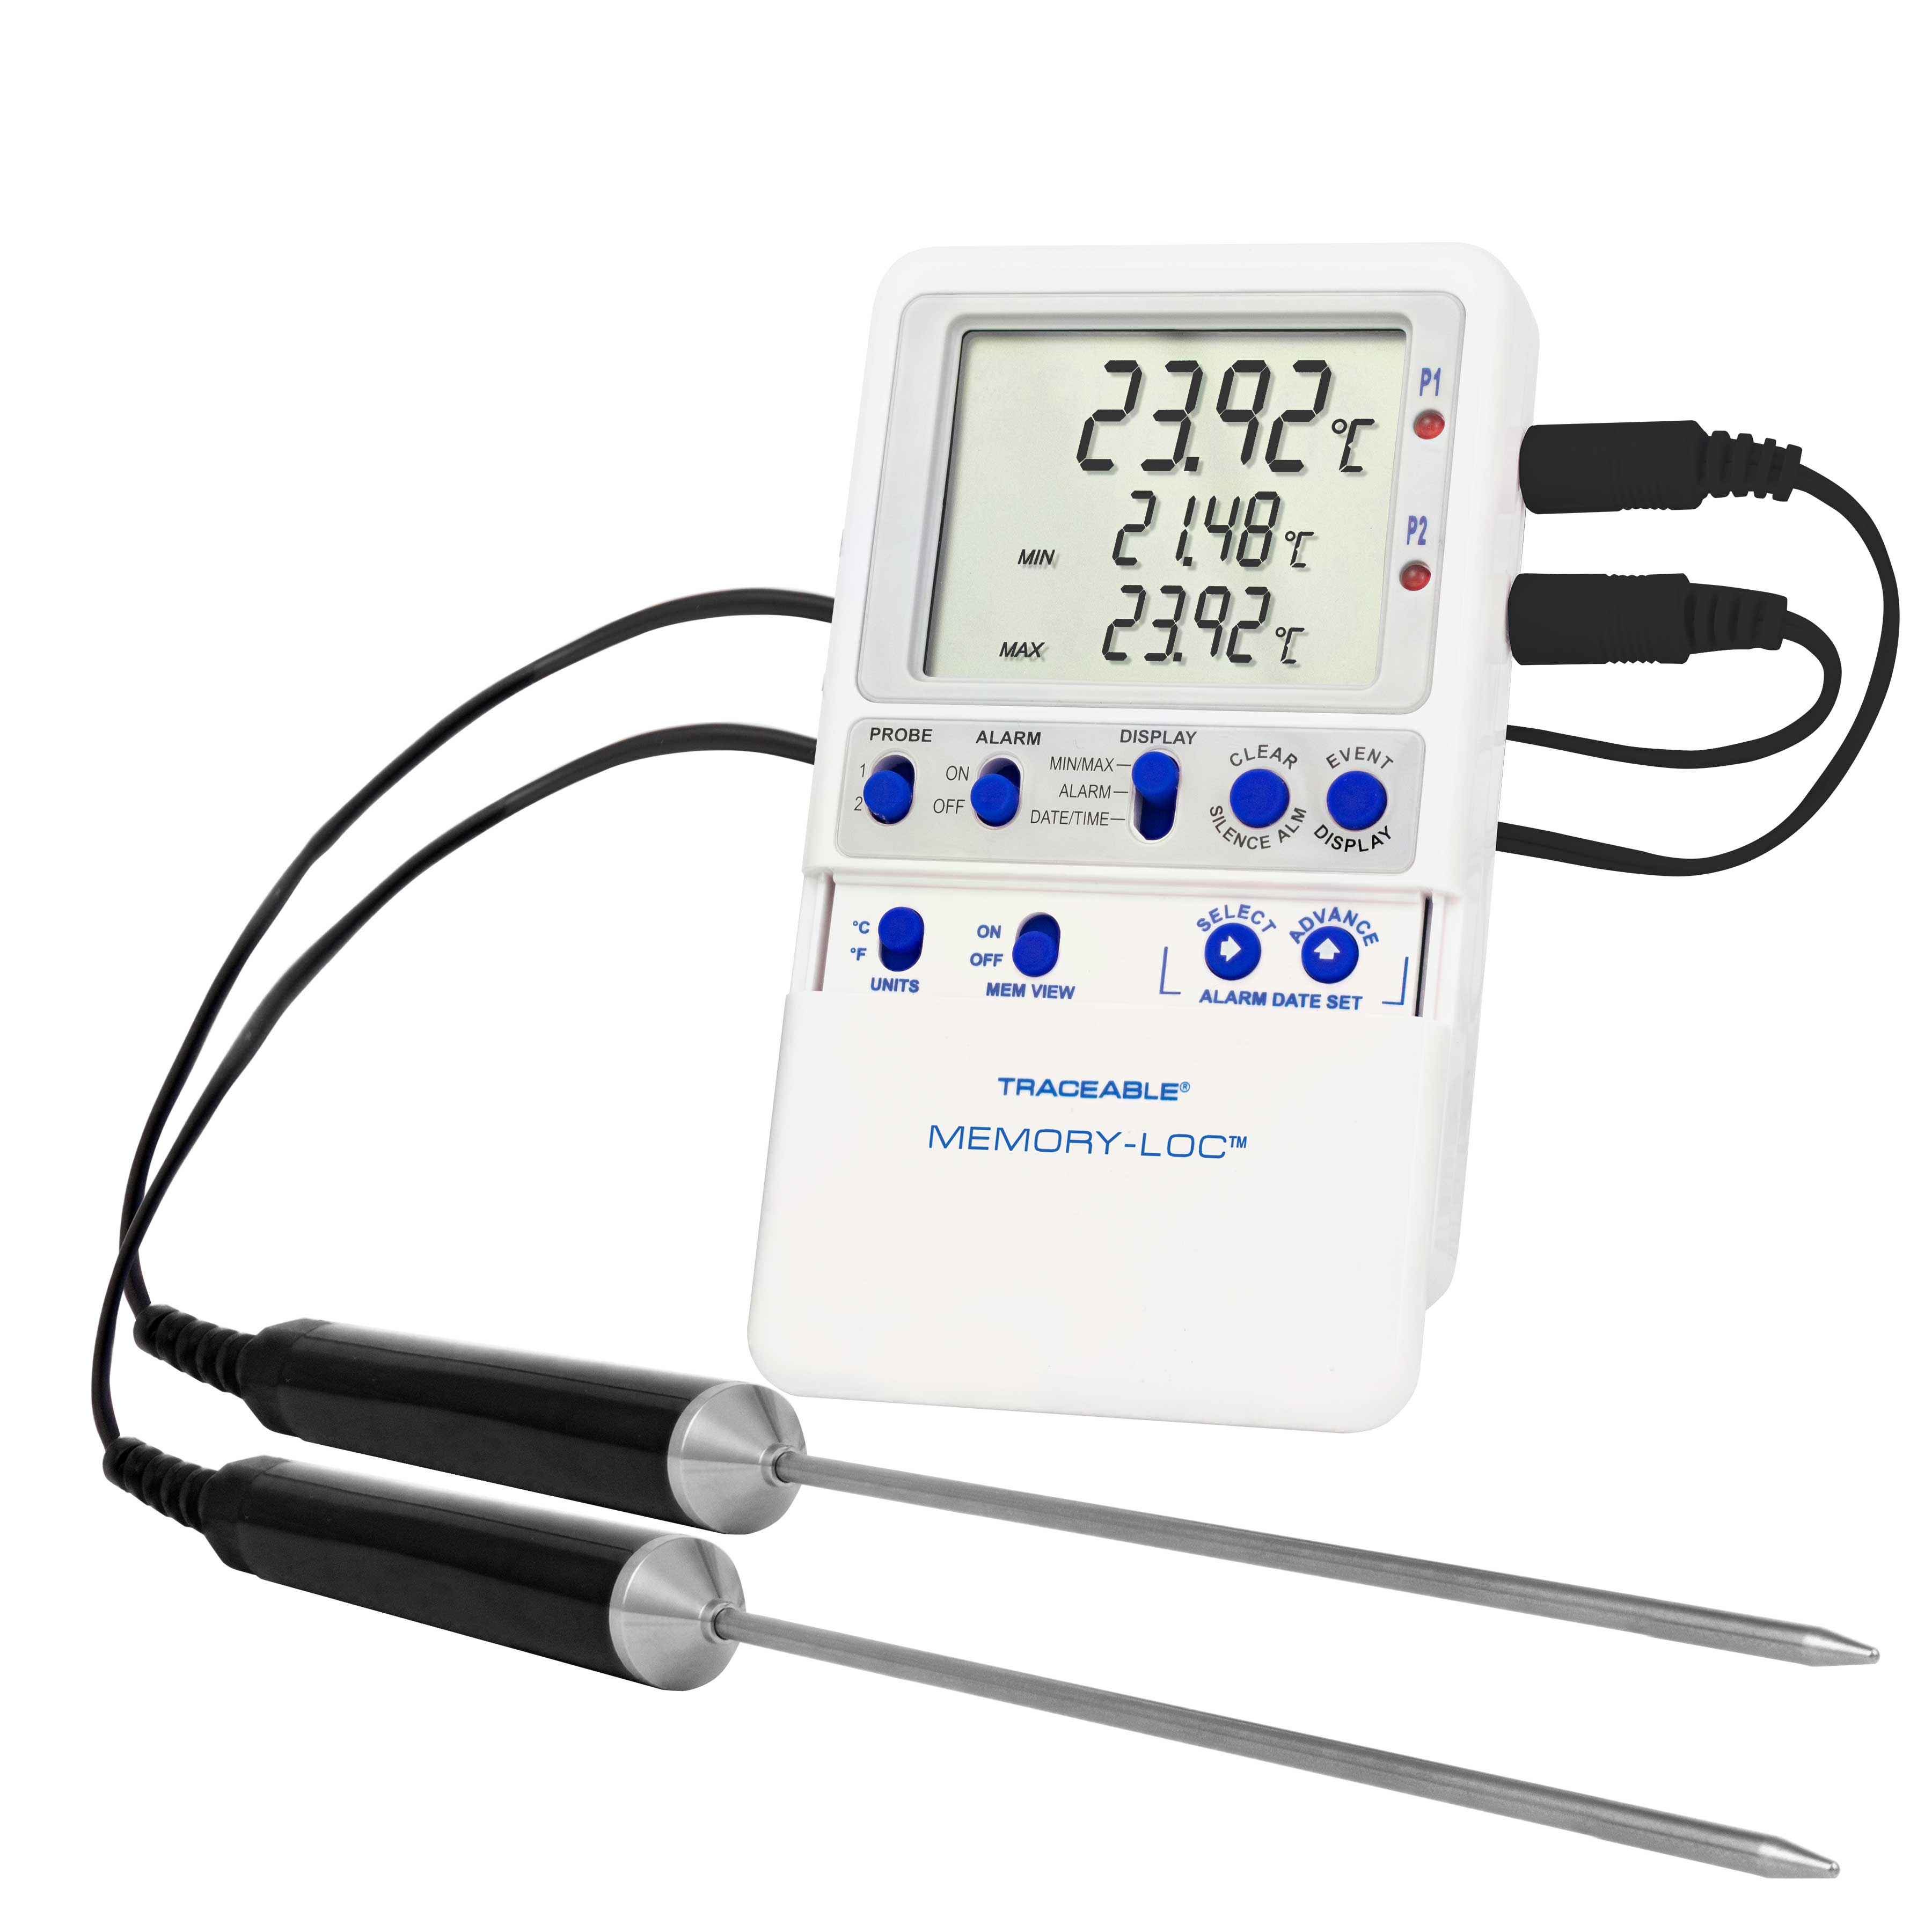 Memory-Loc datalogging digital thermometer. TRACEABLE. Range: –50.00 to 70.00°C. Accuracy: ±0.25°C. Resolution: 0.01°C. Probes: 2 stainless-steel probes. Application: Refrigerators and Freezers